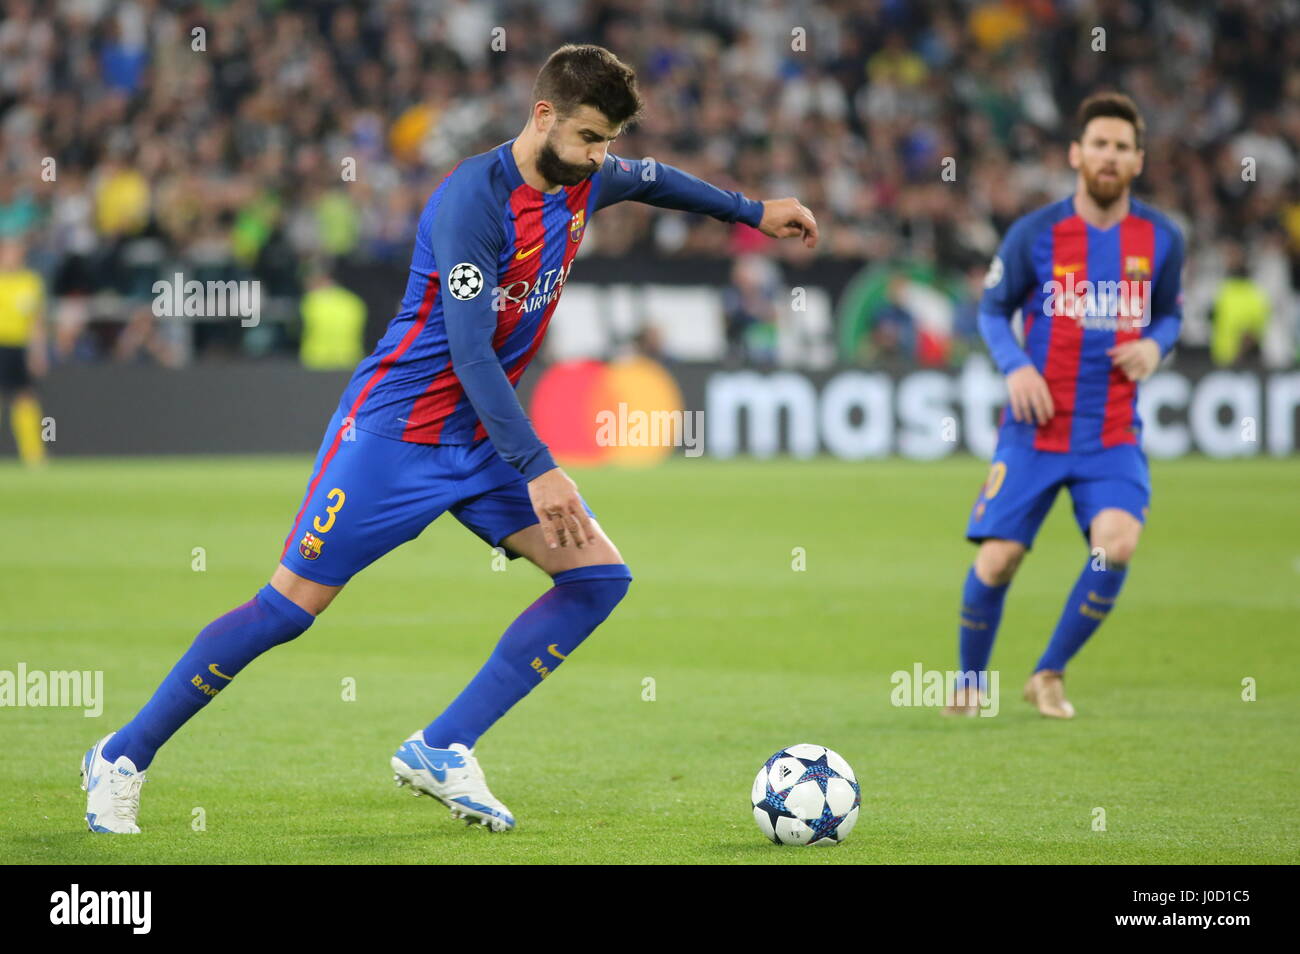 Turin, Italy. 11th Apr, 2017. Gerard Pique (FCB Barcelona) in action during the 1st leg of Champions League quarter-final between Juventus FC and FCB Barcelona at Juventus Stadium on April 11, 2017 in Turin, Italy. Juventus won 3-0 over Barcelona. Credit: Massimiliano Ferraro/Alamy Live News Stock Photo